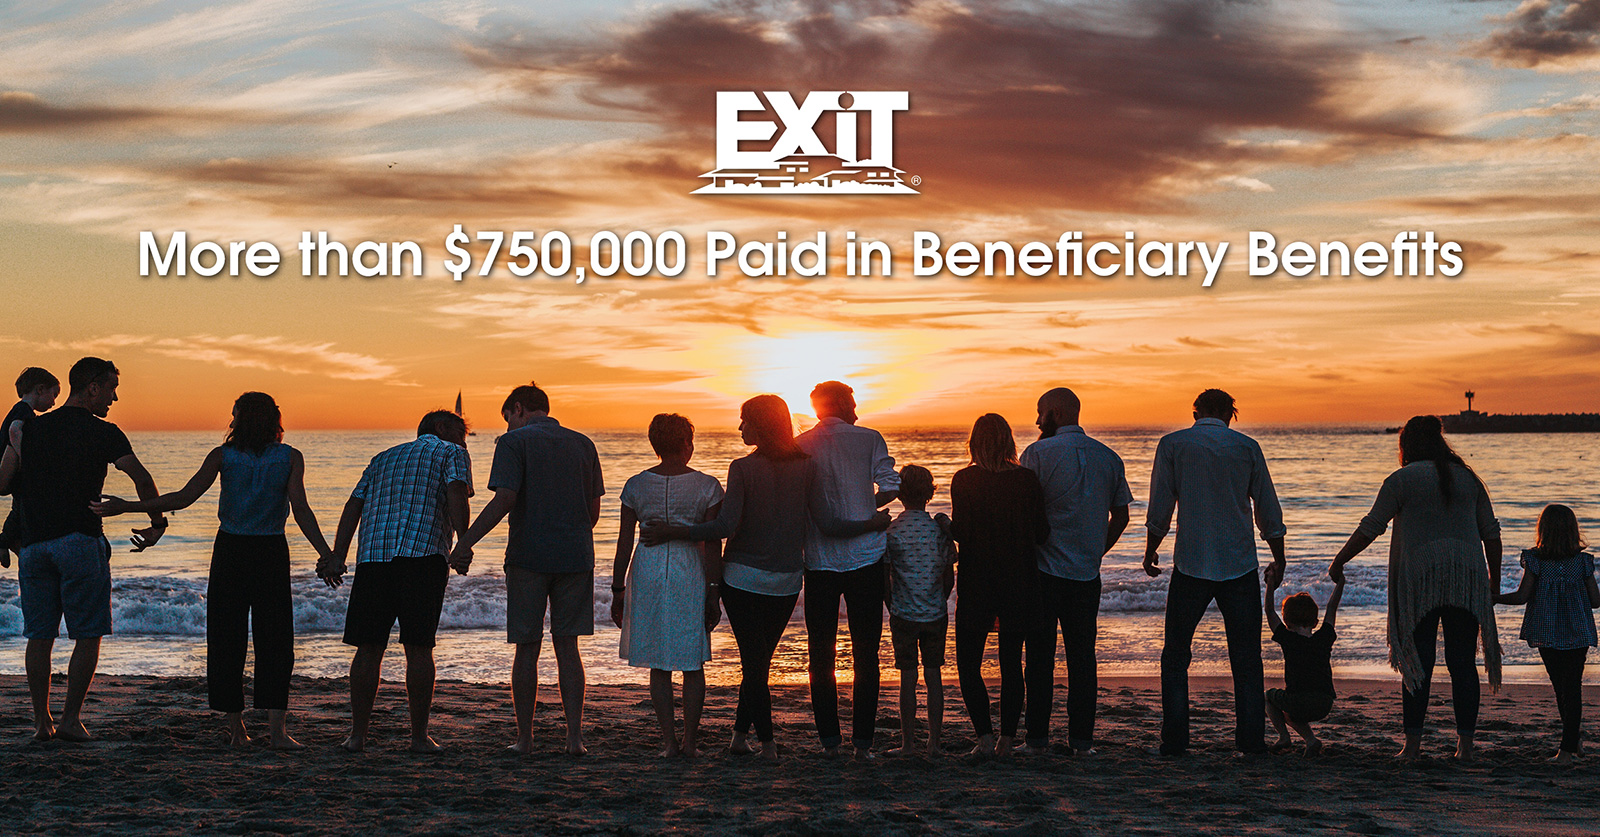 More than $750,000 Paid in Beneficiary Benefits by EXIT Realty Corp. International